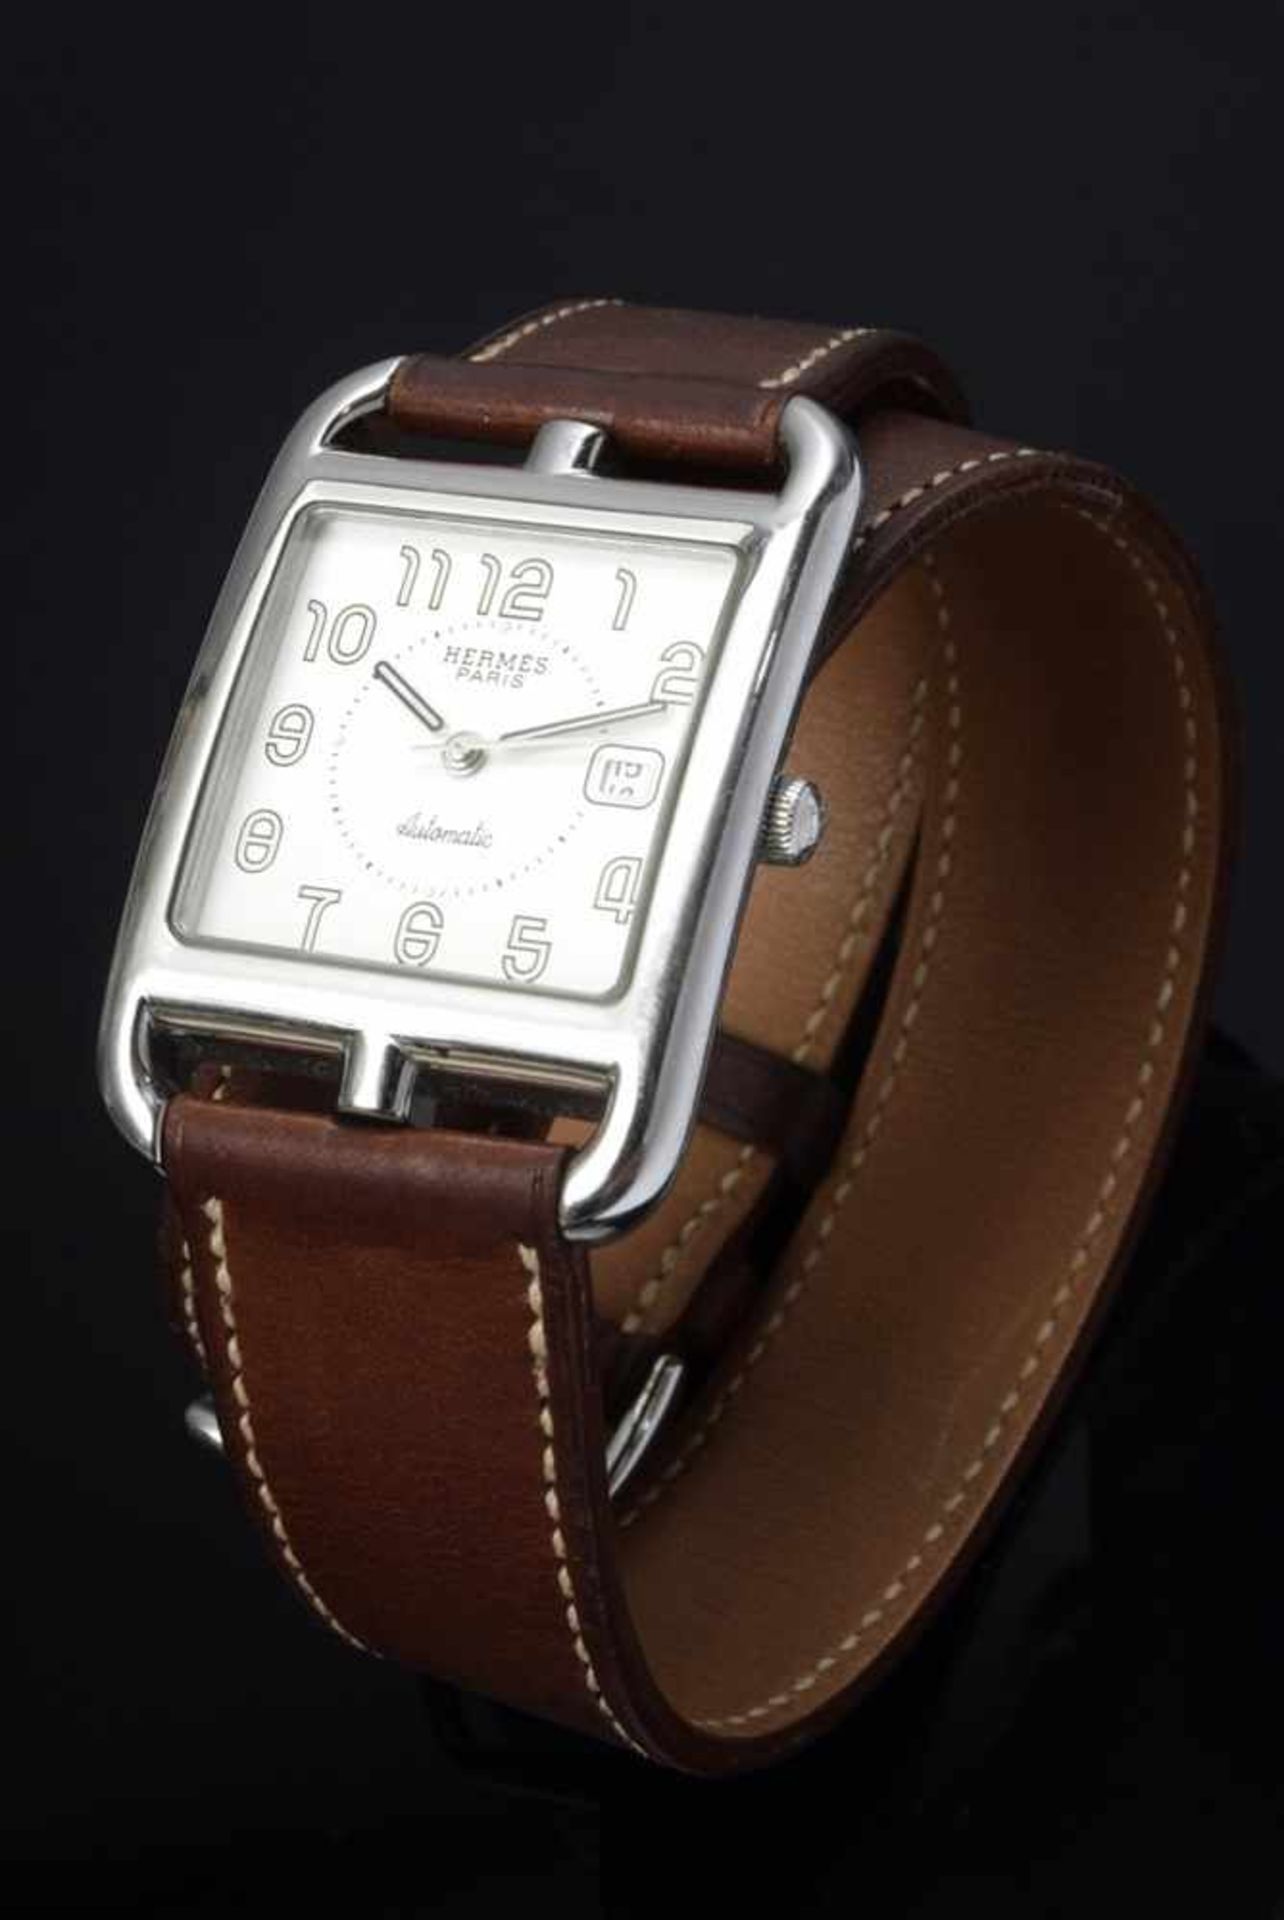 Sporty Hermès "Cape Cod" ladies' watch, stainless steel, automatic movement, date, central second